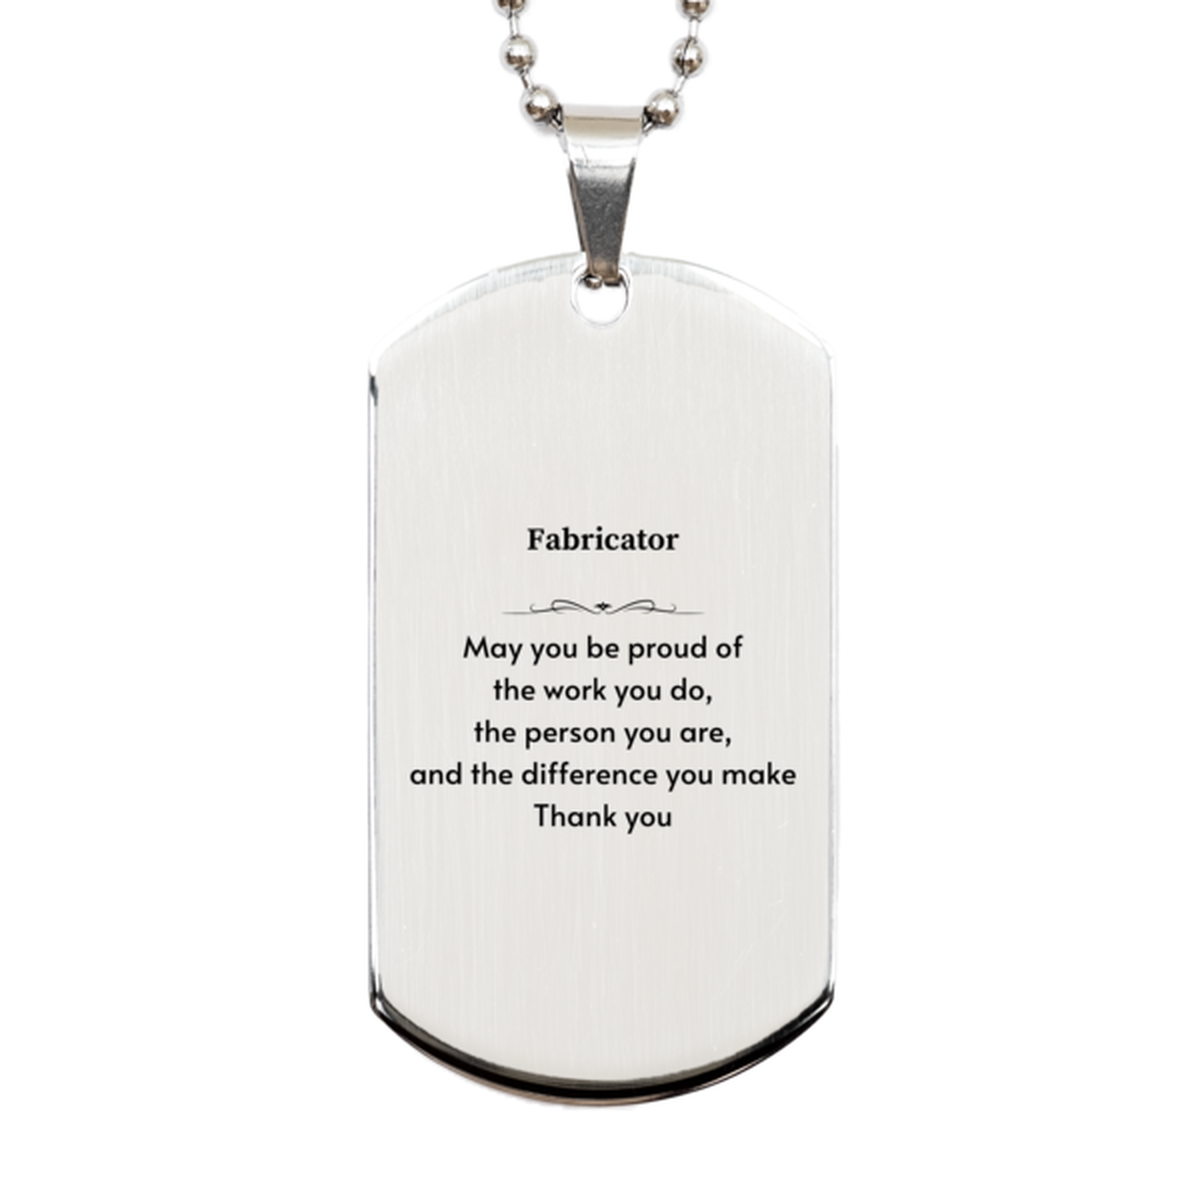 Heartwarming Silver Dog Tag Retirement Coworkers Gifts for Fabricator, Fabricator May You be proud of the work you do, the person you are Gifts for Boss Men Women Friends